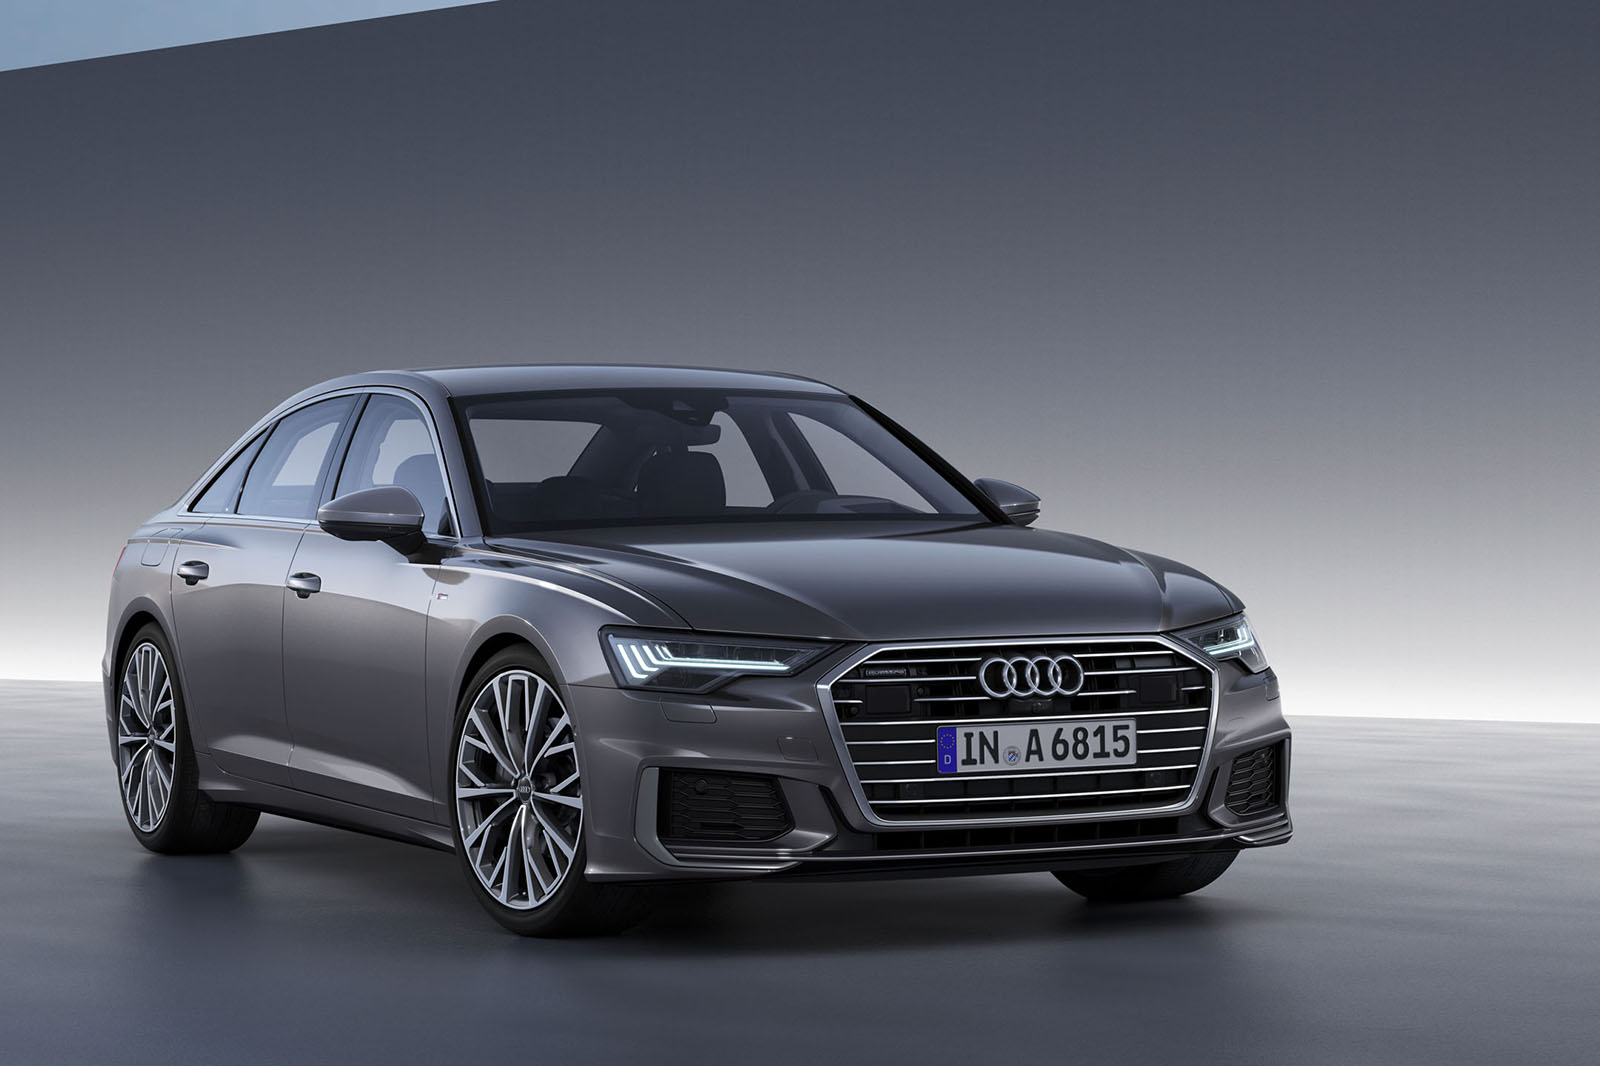 Audi A6 Designer The New A6 Is The Sportiest Car In Its Class Autocar